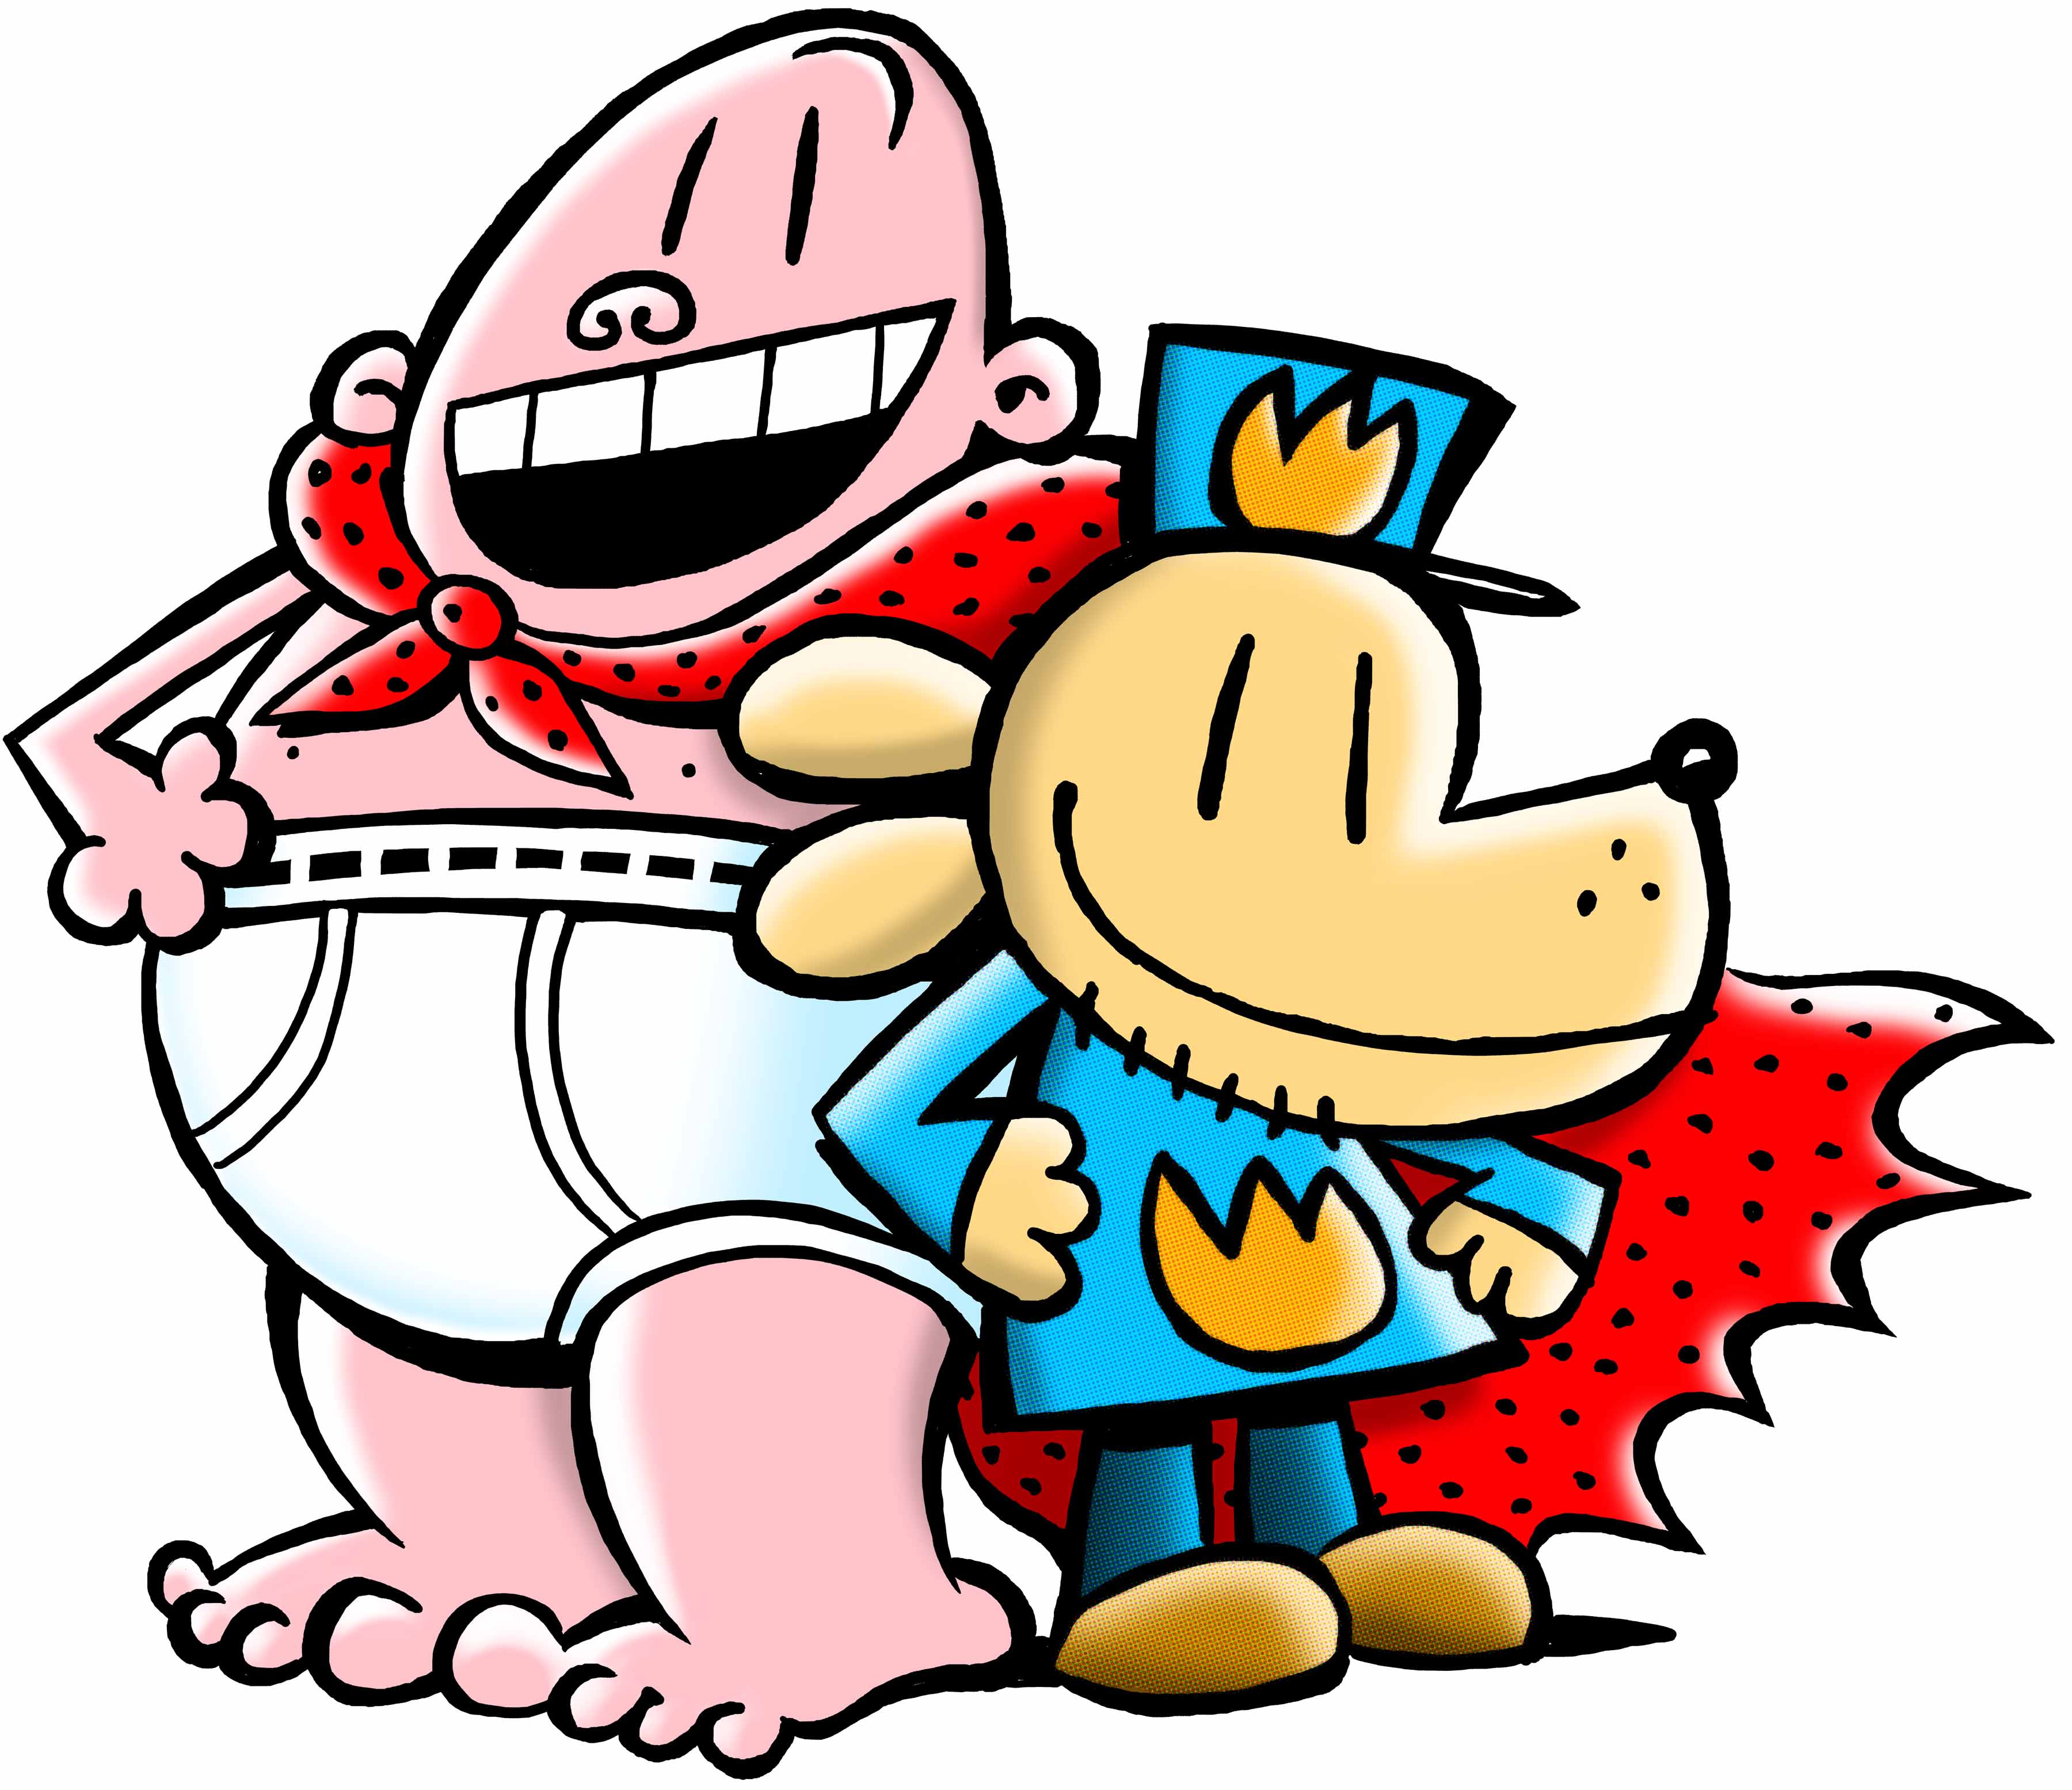 Captain Underpants and Dog Man